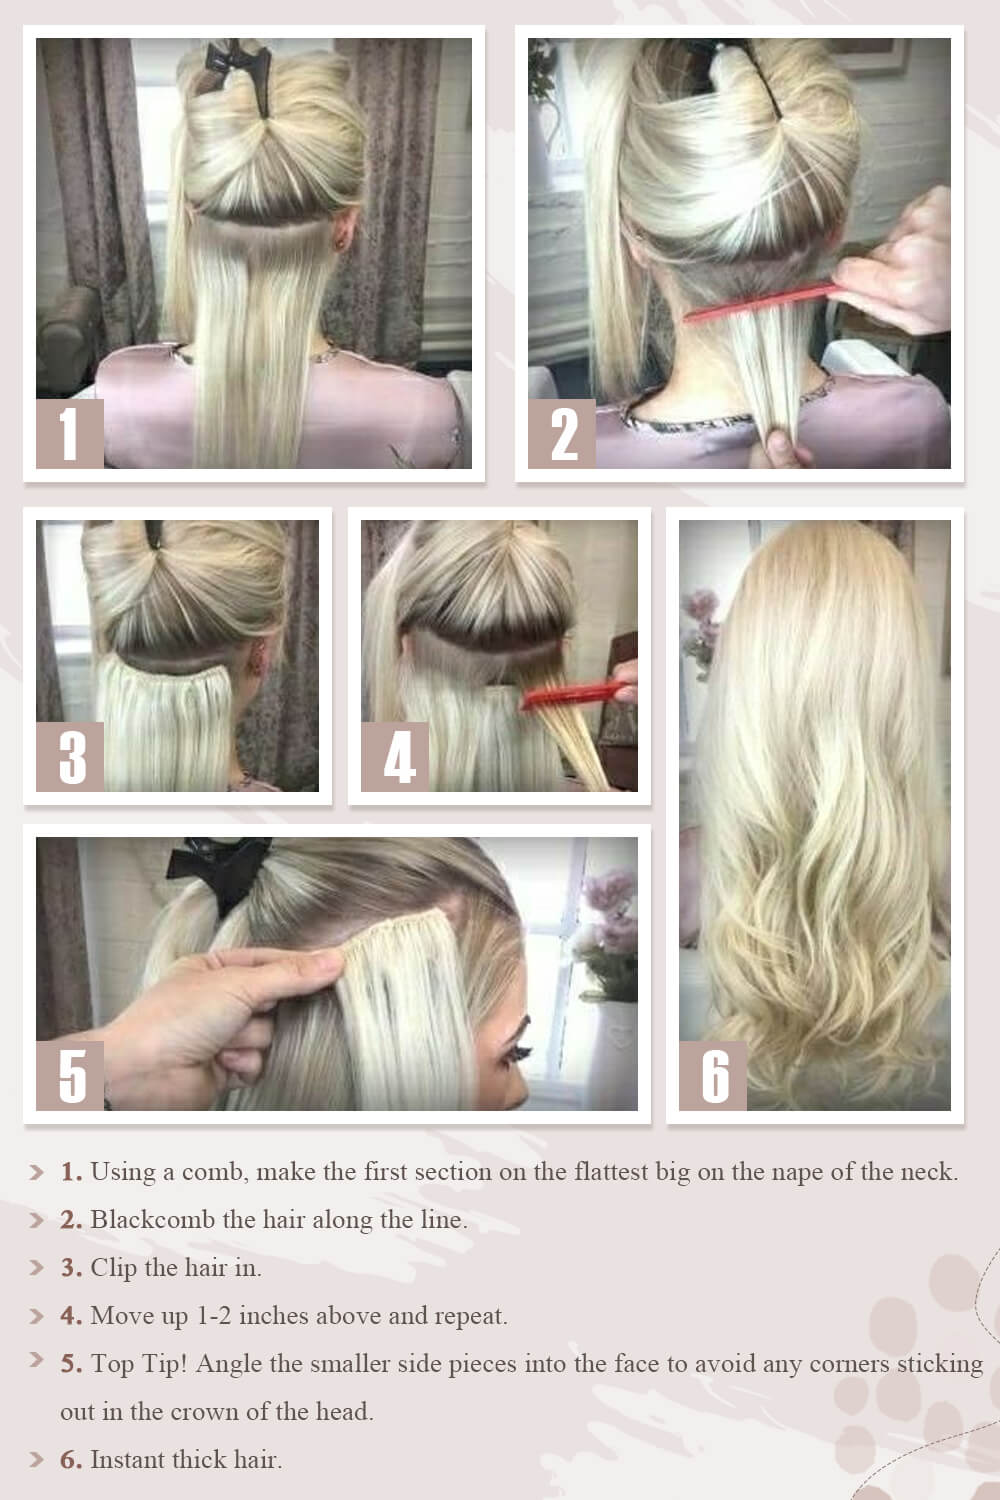 1. Using a comb, make the first section on the flattest big on the nape of the neck. 2. Blackcomb the hair along the line. 3. Clip the hair in. 4. Move up 1-2 inches above and repeat. 5. Top Tip! Angle the smaller side pieces into the face to avoid any corners sticking out in the crown of the head. 6. Instant thick hair.